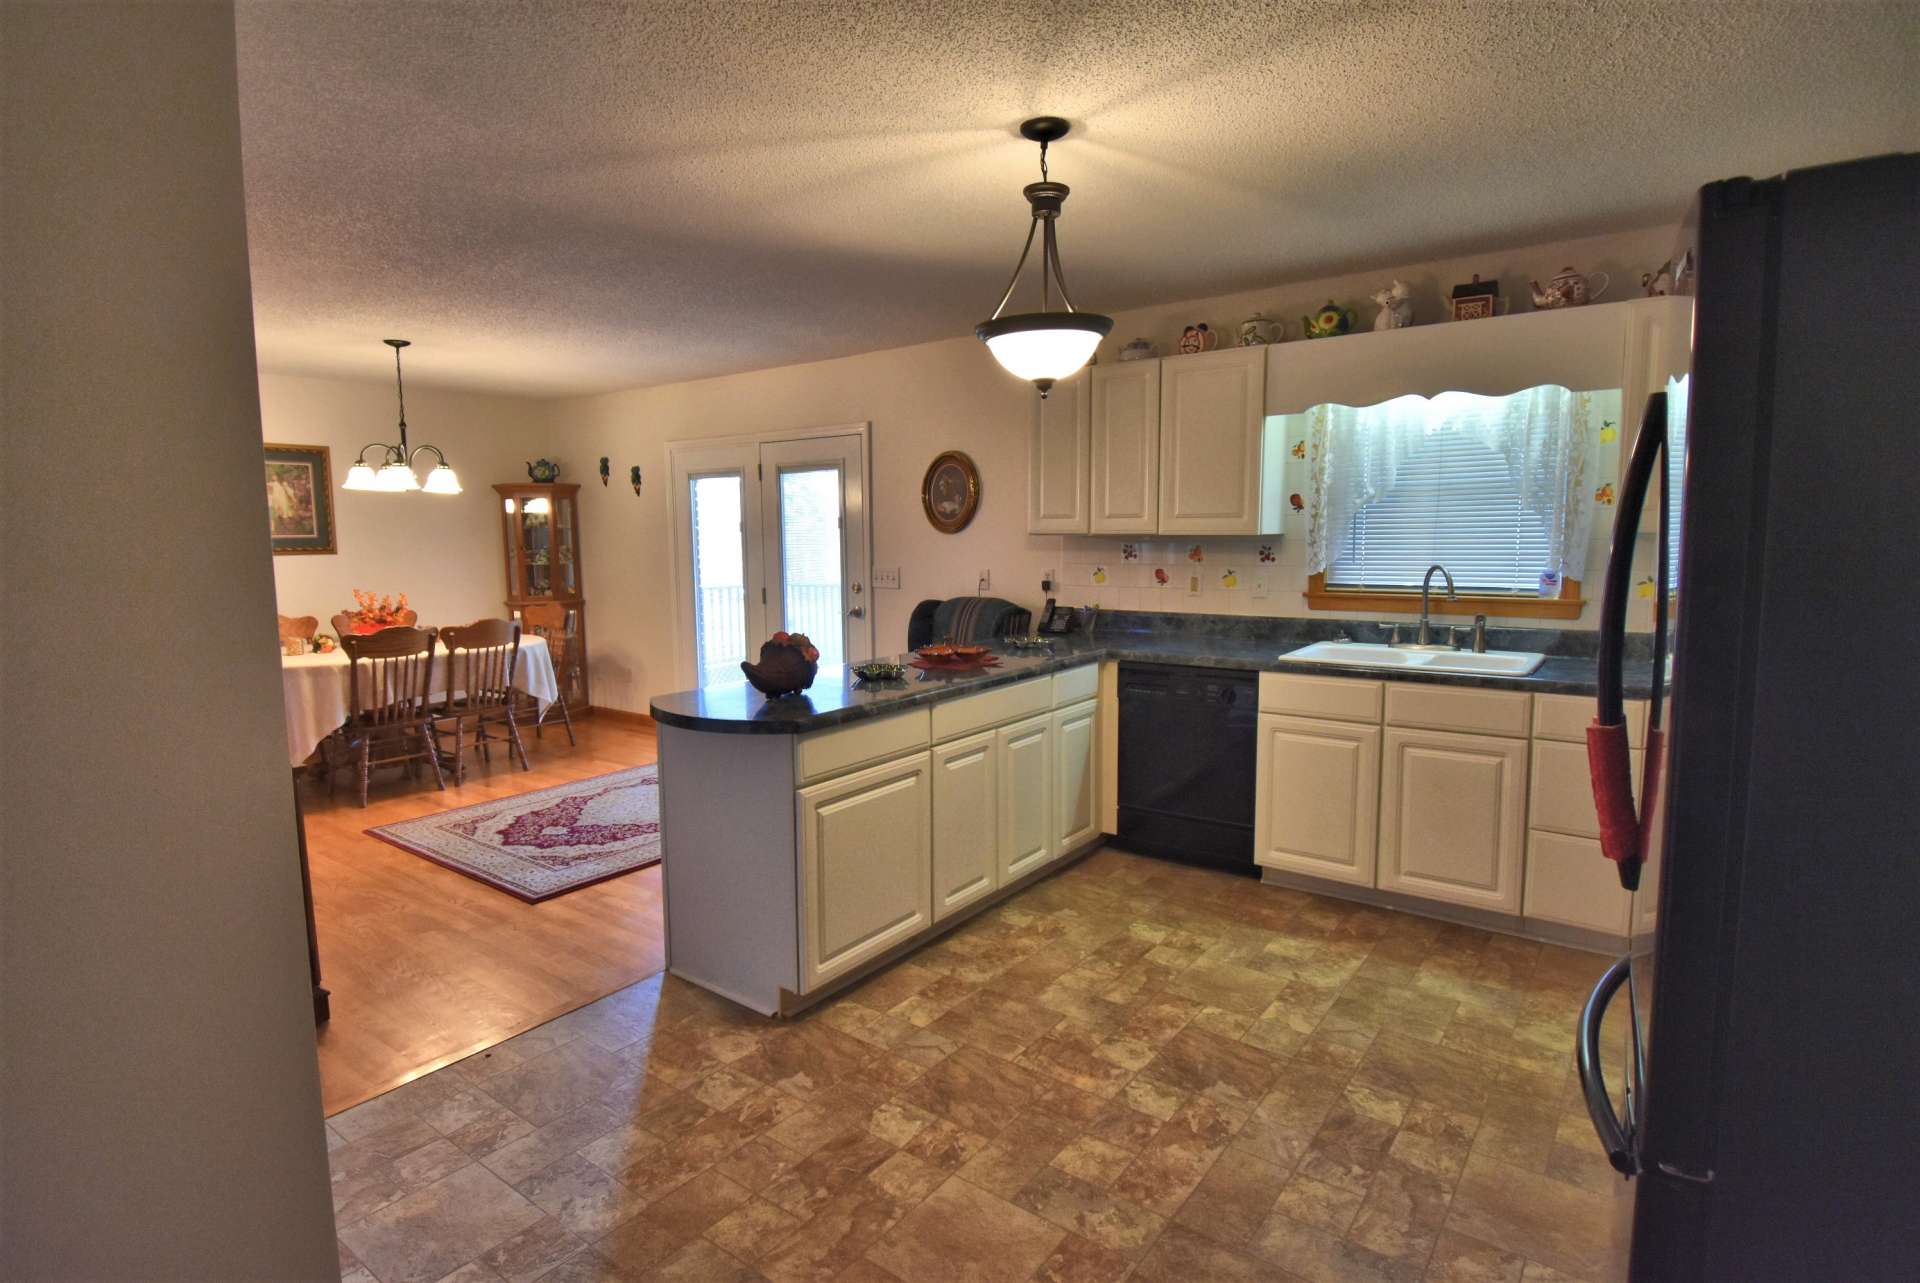 The kitchen is open to the dining area for convenience when entertaining family and friends.